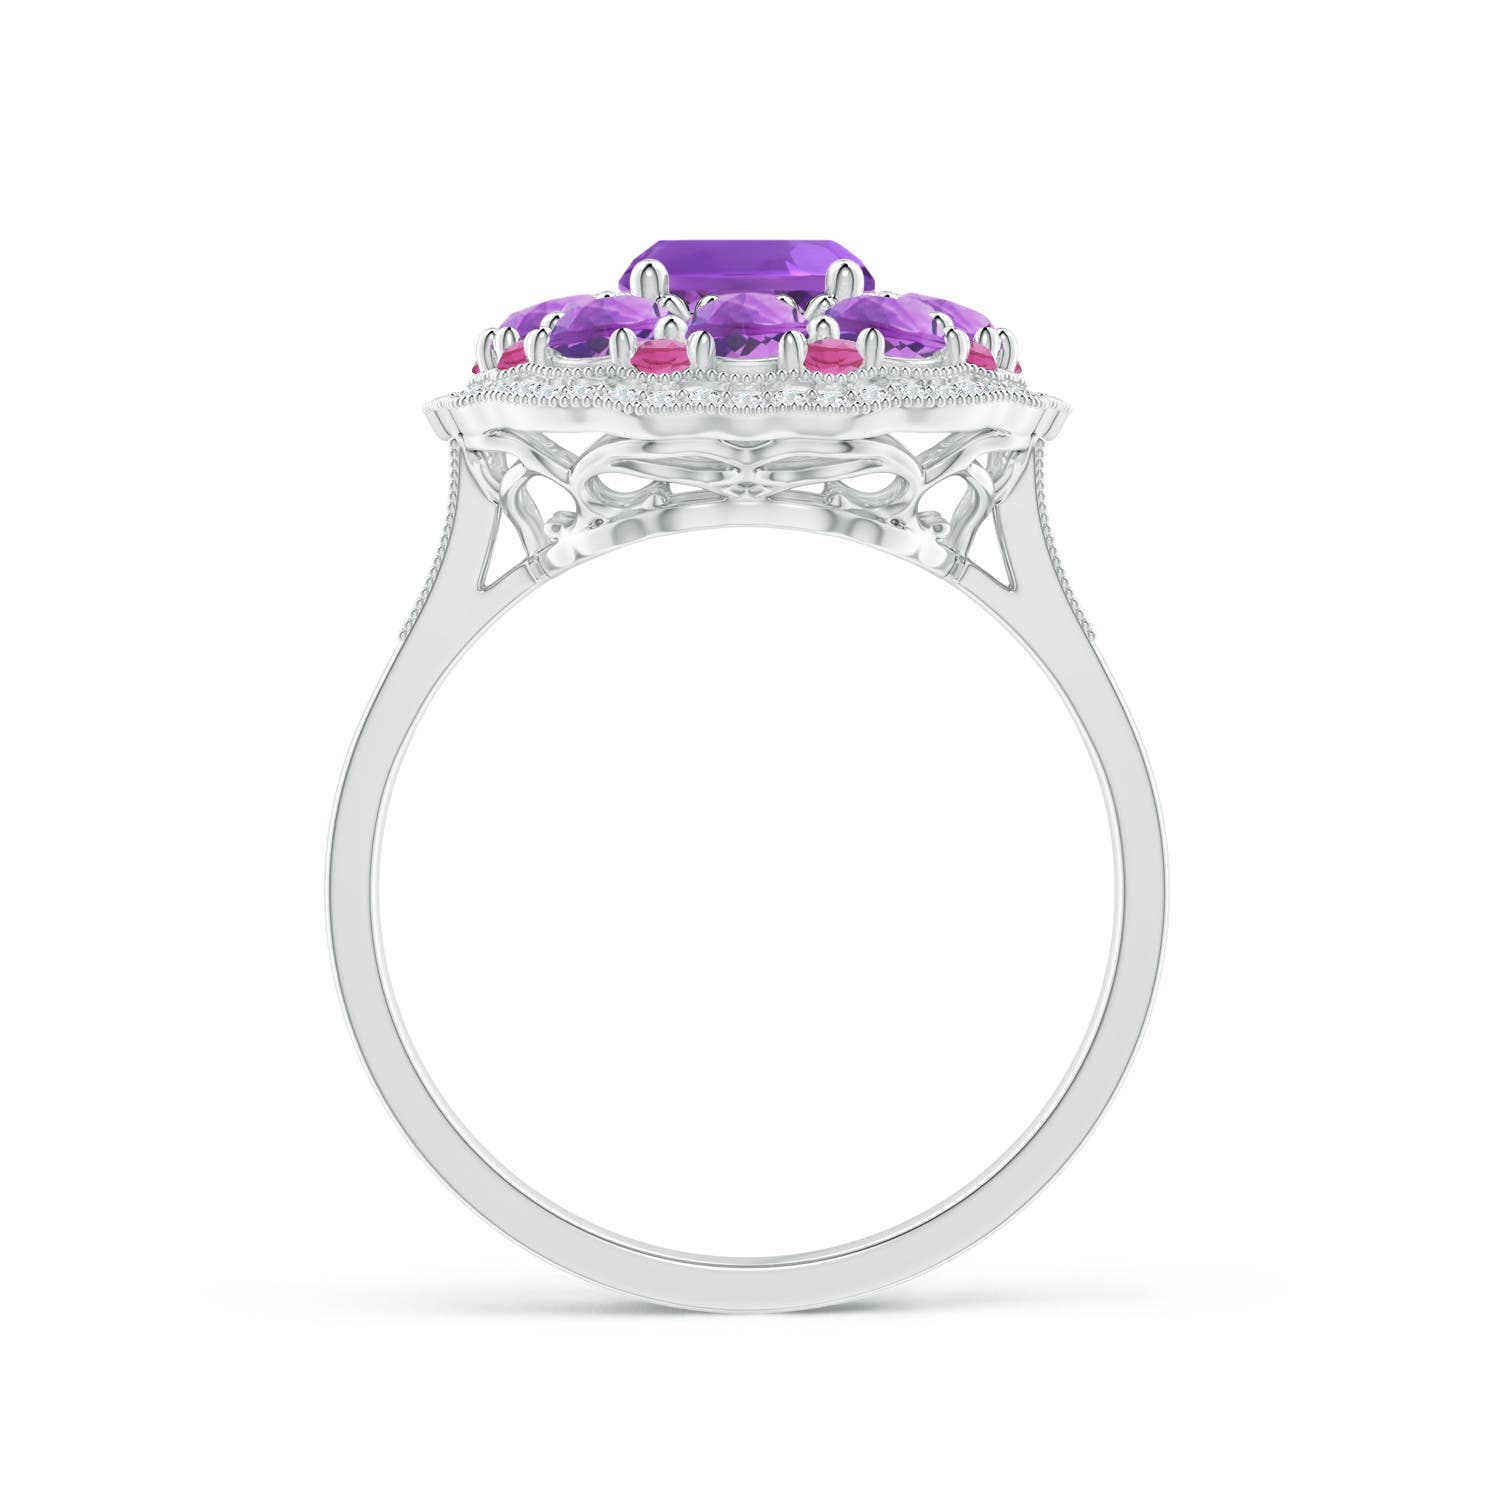 AAA - Amethyst / 2.58 CT / 14 KT White Gold